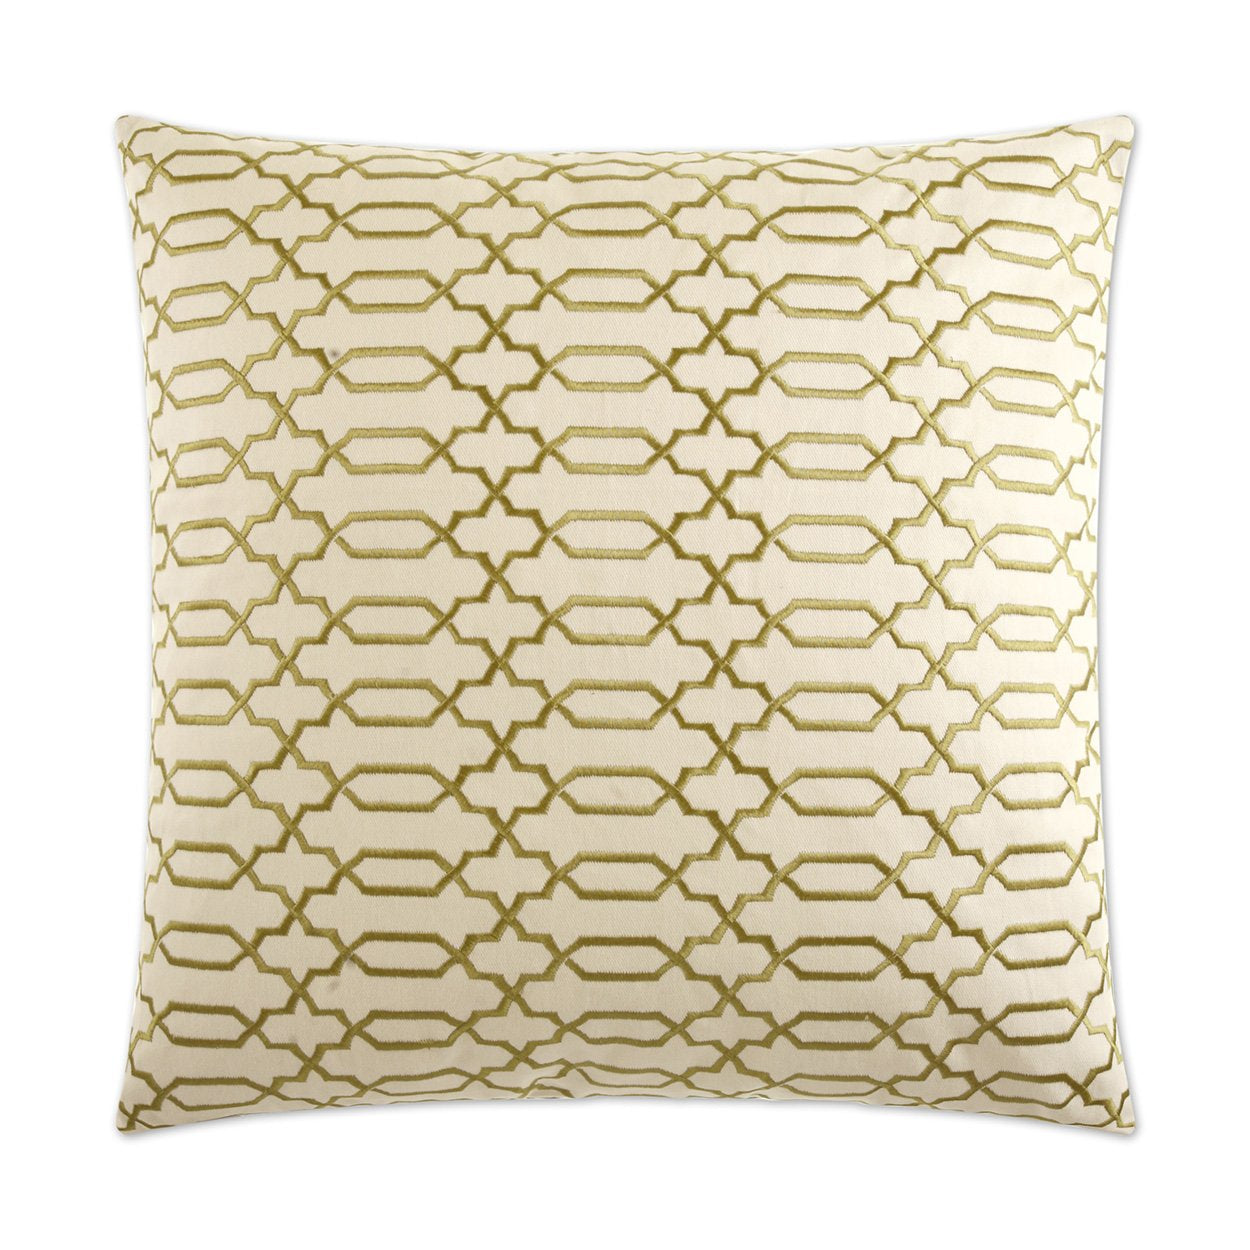 REDUCED TO CLEAR Luxury Pillow - 24" x 24" - Lattice; Embroidered lime green design over a cream background